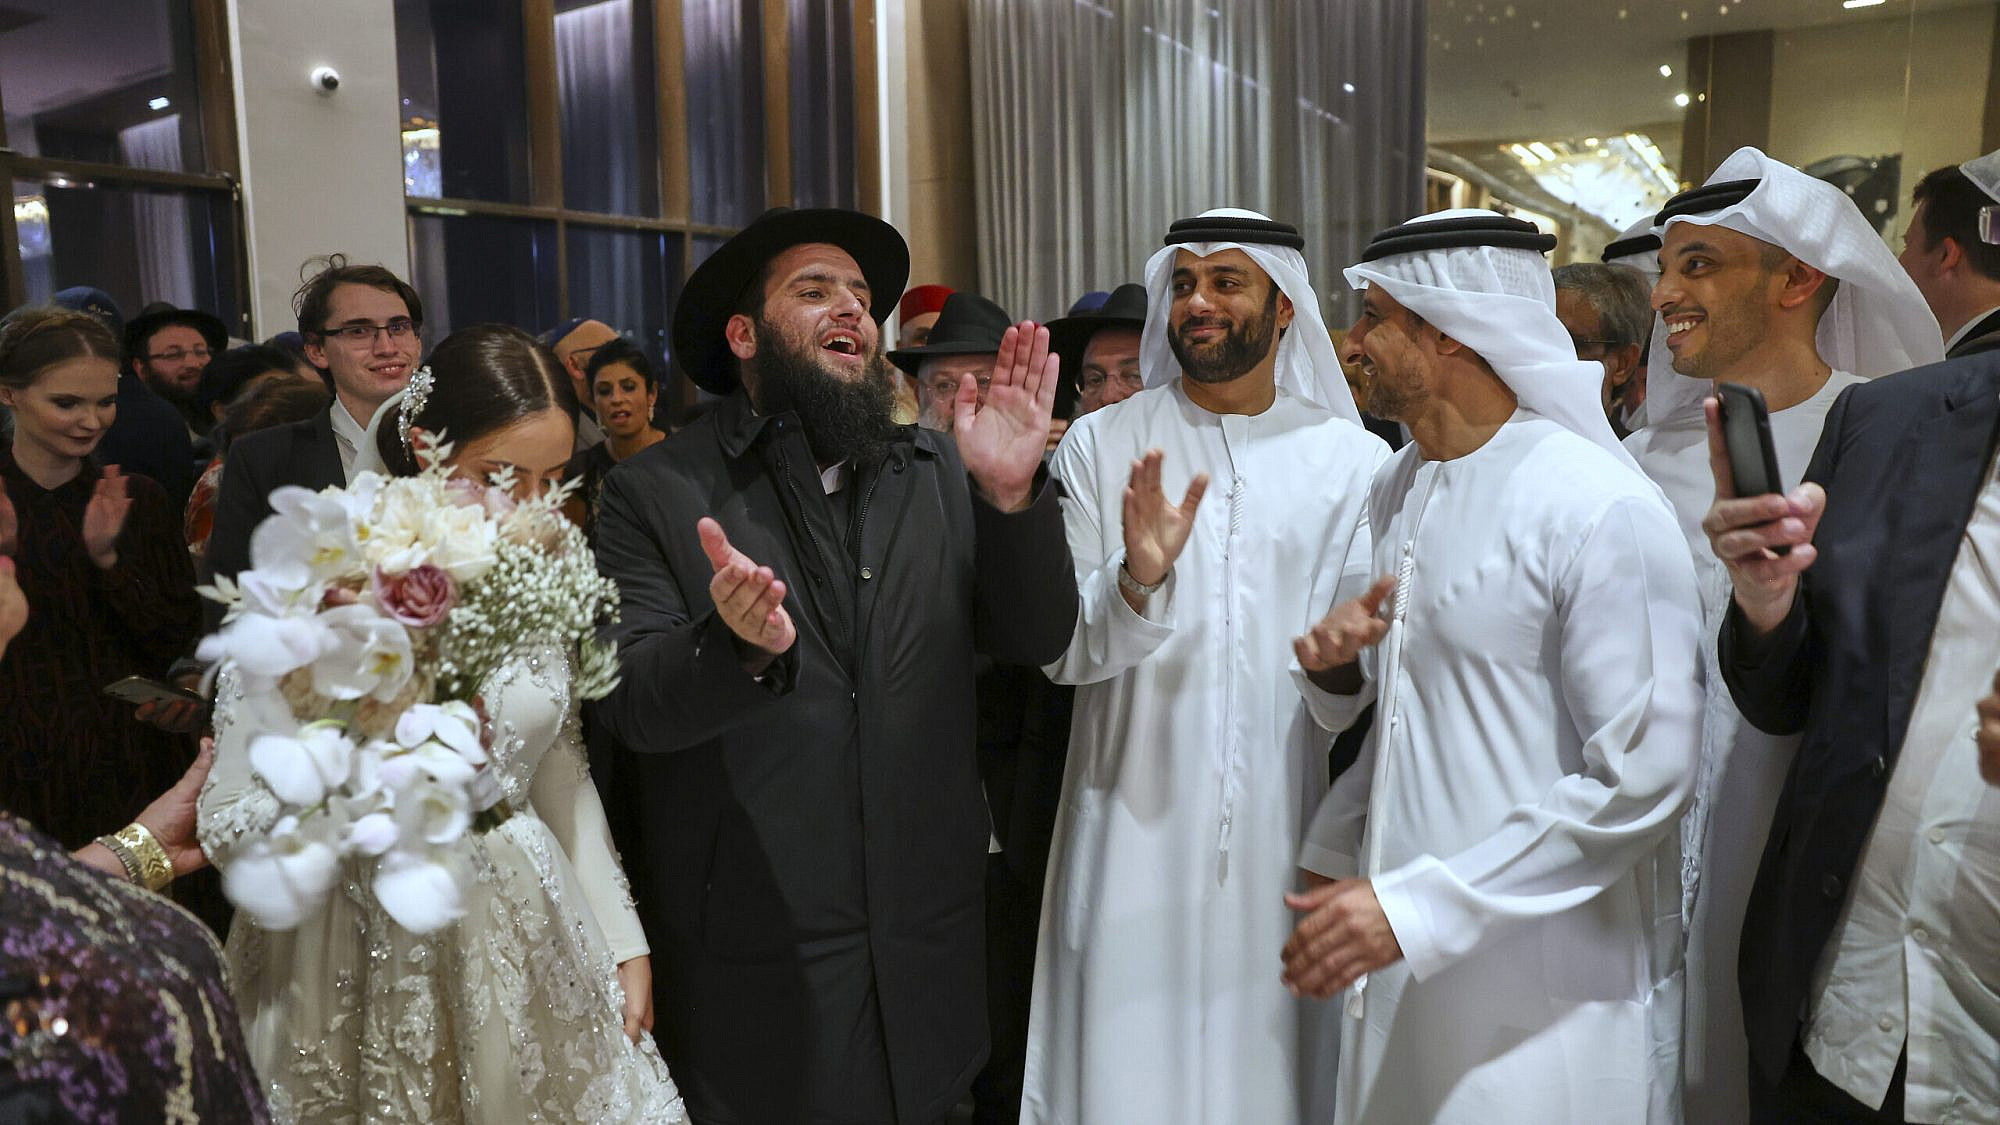 UAE Rabbi Levi Duchman and Lea Hadad during their wedding. The wedding is the largest Jewish event in the history of the Emirates. Credit: Jewish UAE/Christopher Pike.